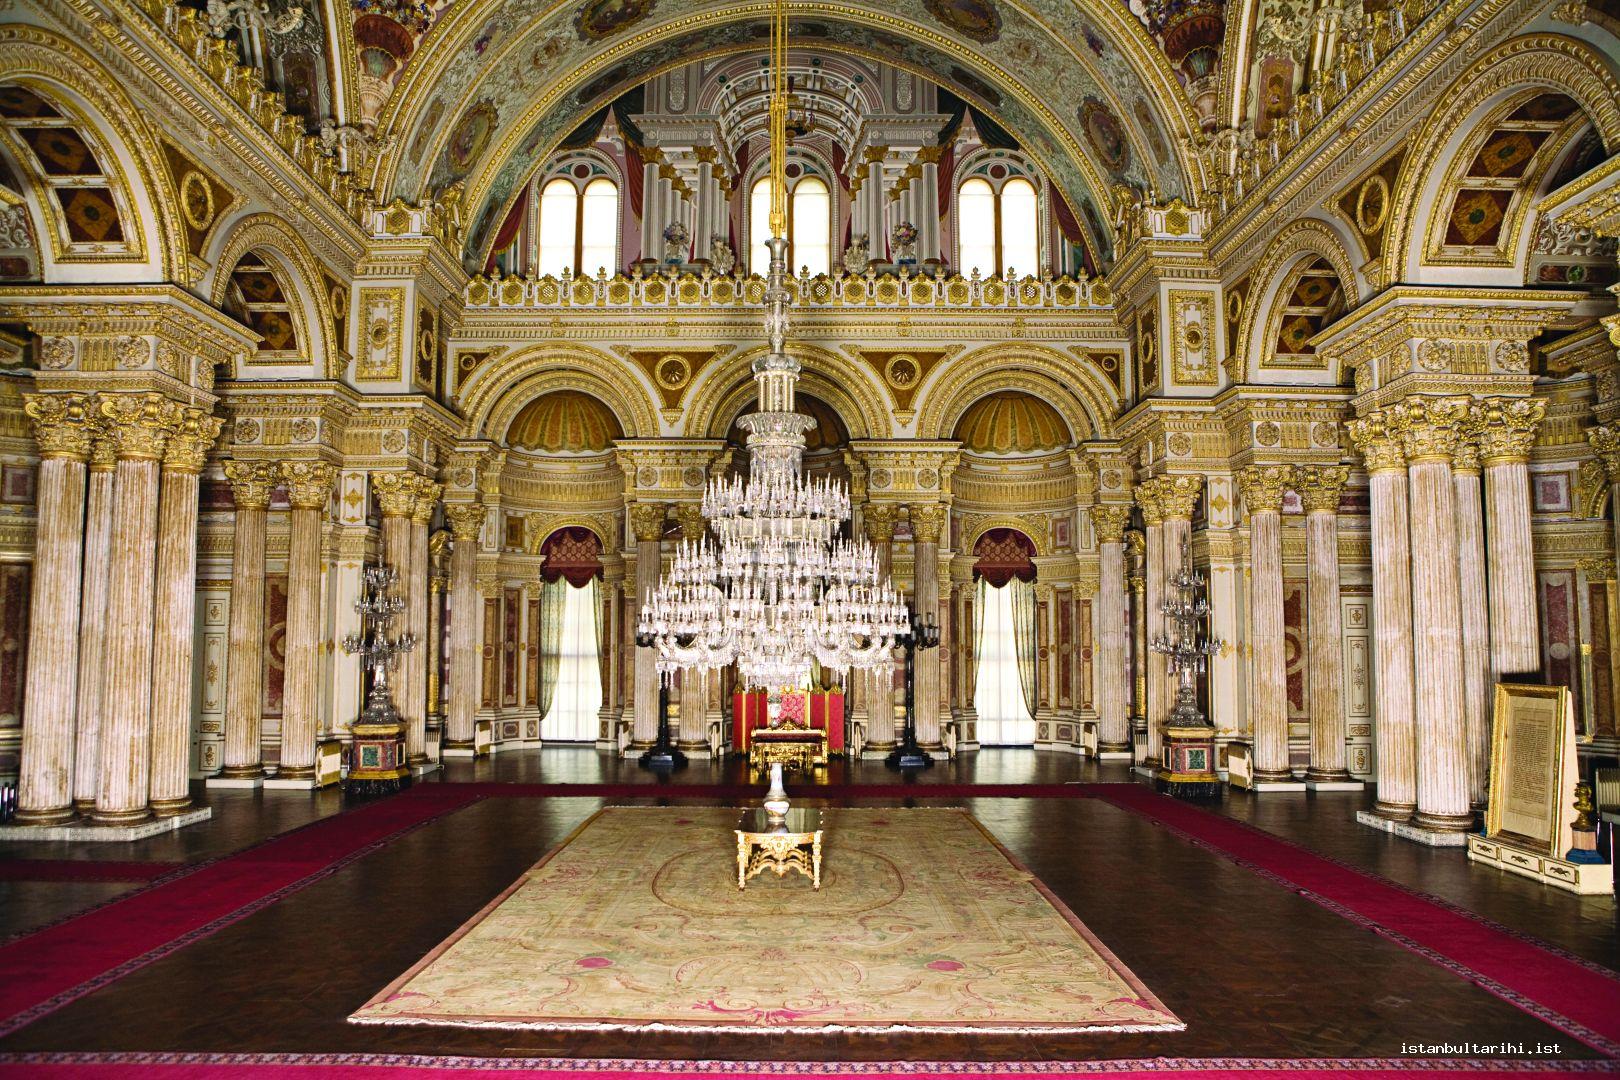 5- Zülvecheyn (one with two faces) Hall in Dolmabahçe Palace